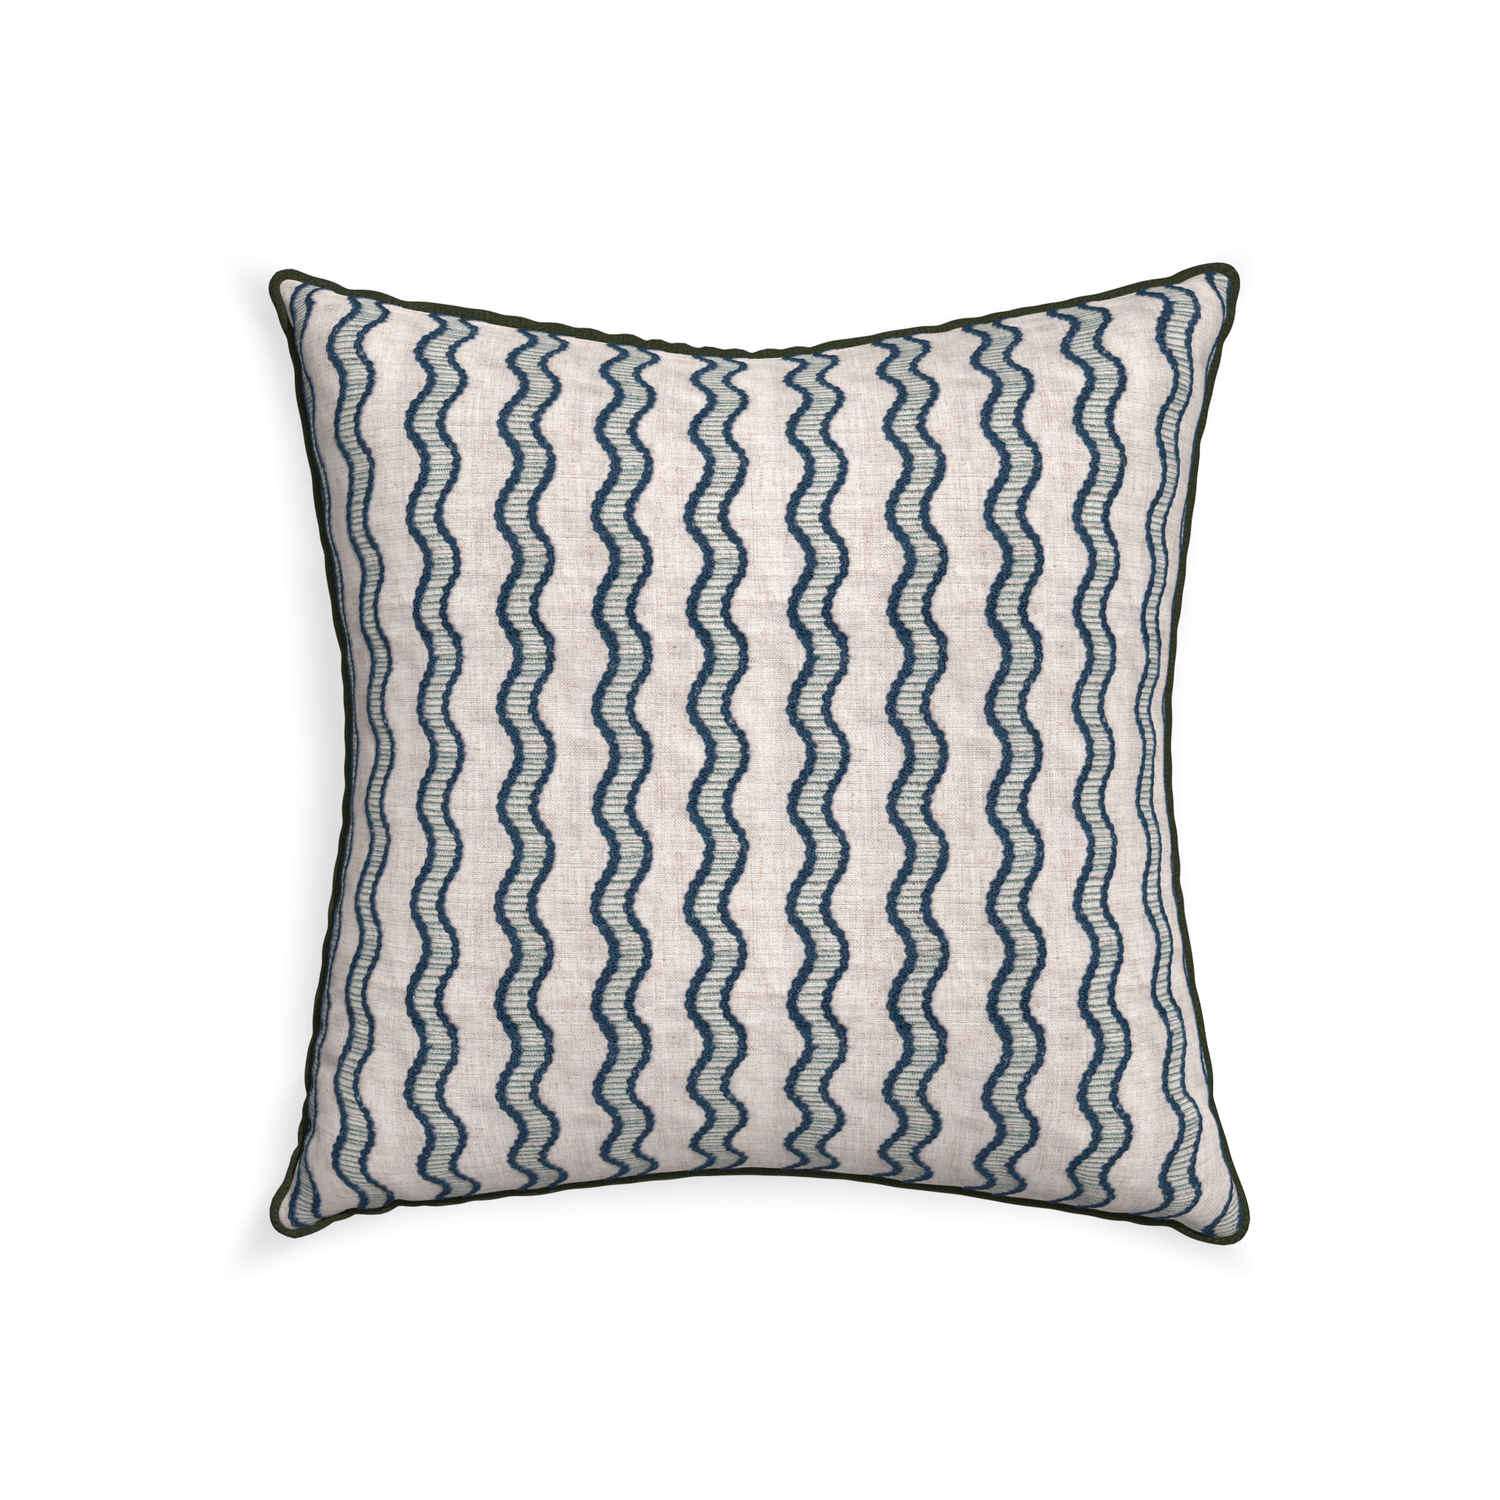 22-square beatrice custom embroidered wavepillow with f piping on white background